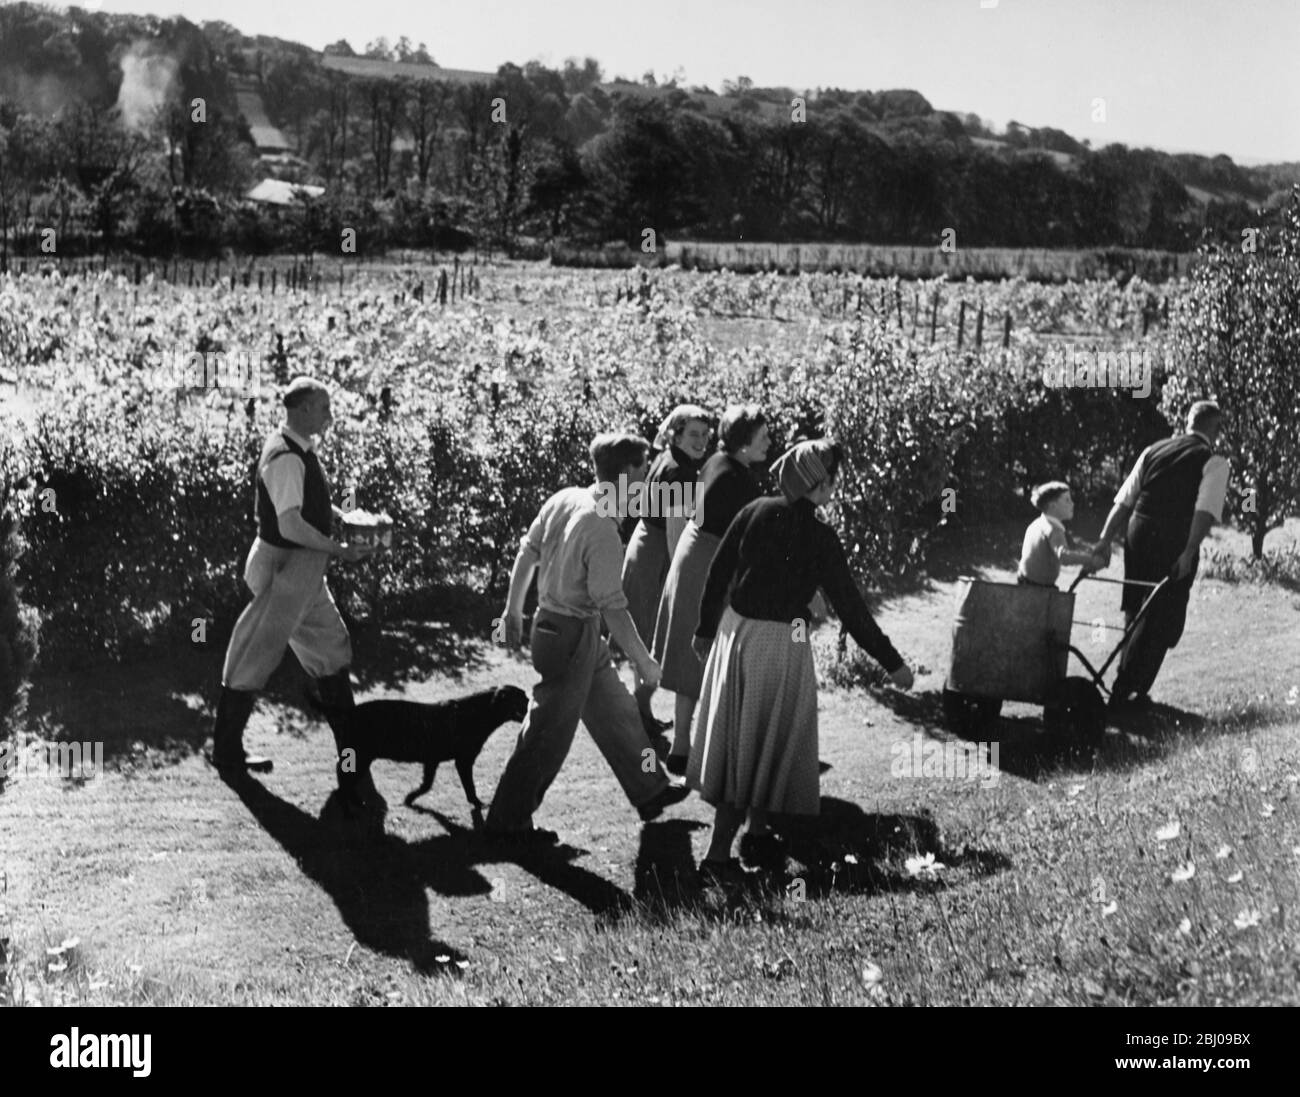 No Caption. - Picture shows: Men women and children walking through the vineyard with their dog and a barrel. Stock Photo